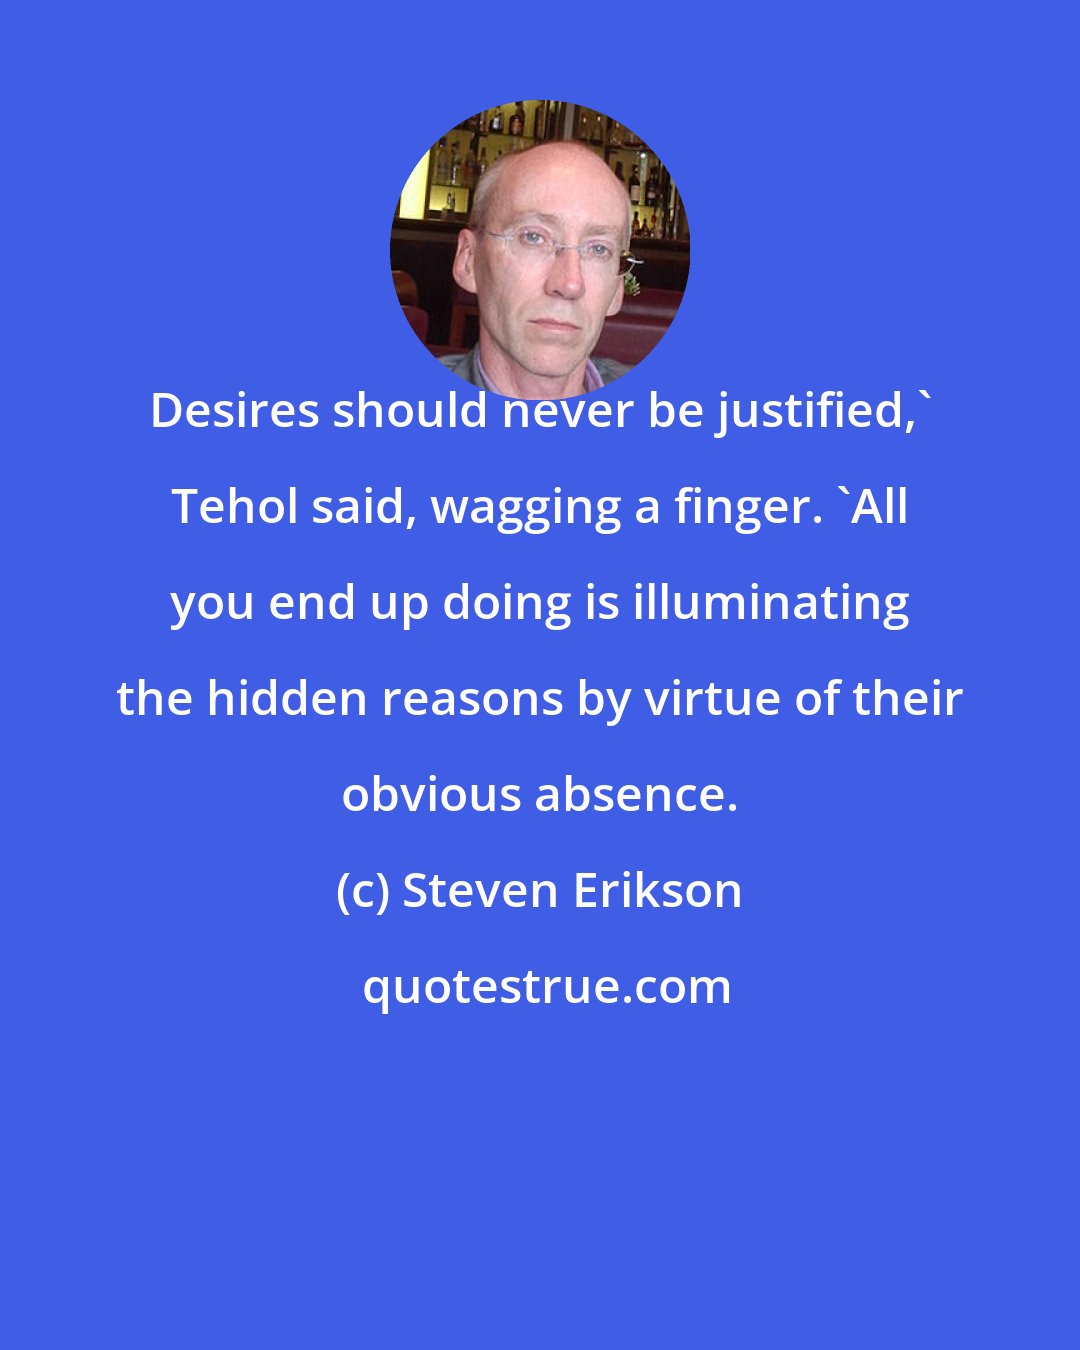 Steven Erikson: Desires should never be justified,' Tehol said, wagging a finger. 'All you end up doing is illuminating the hidden reasons by virtue of their obvious absence.